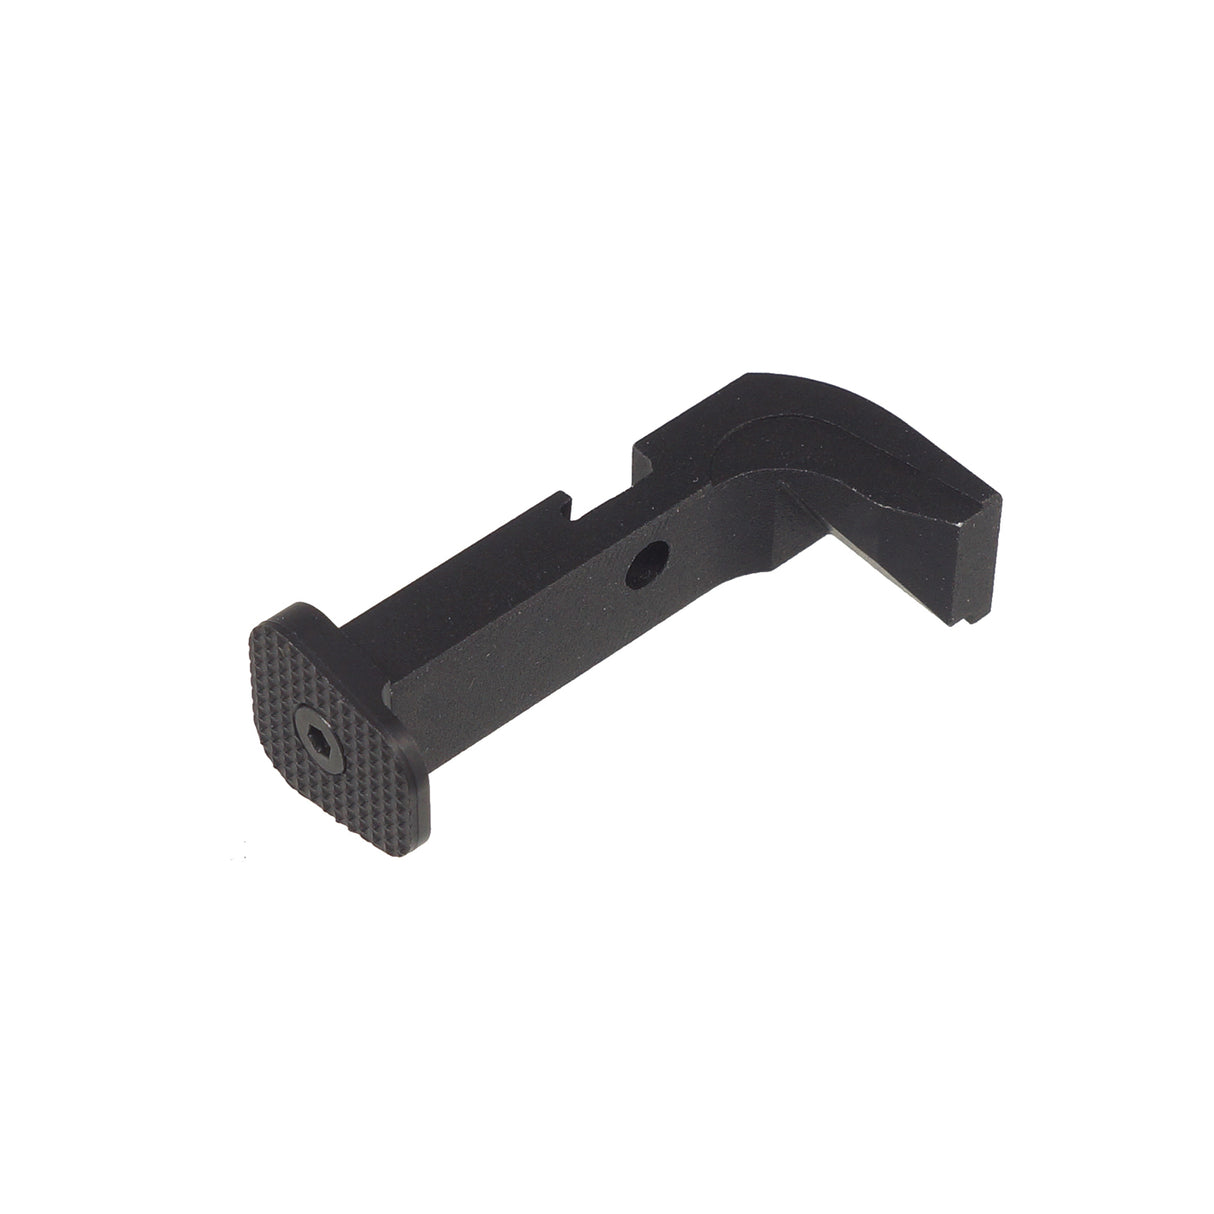 Double Bell G17 Extended Magazine Catch ( DB-G17-JS-2 )